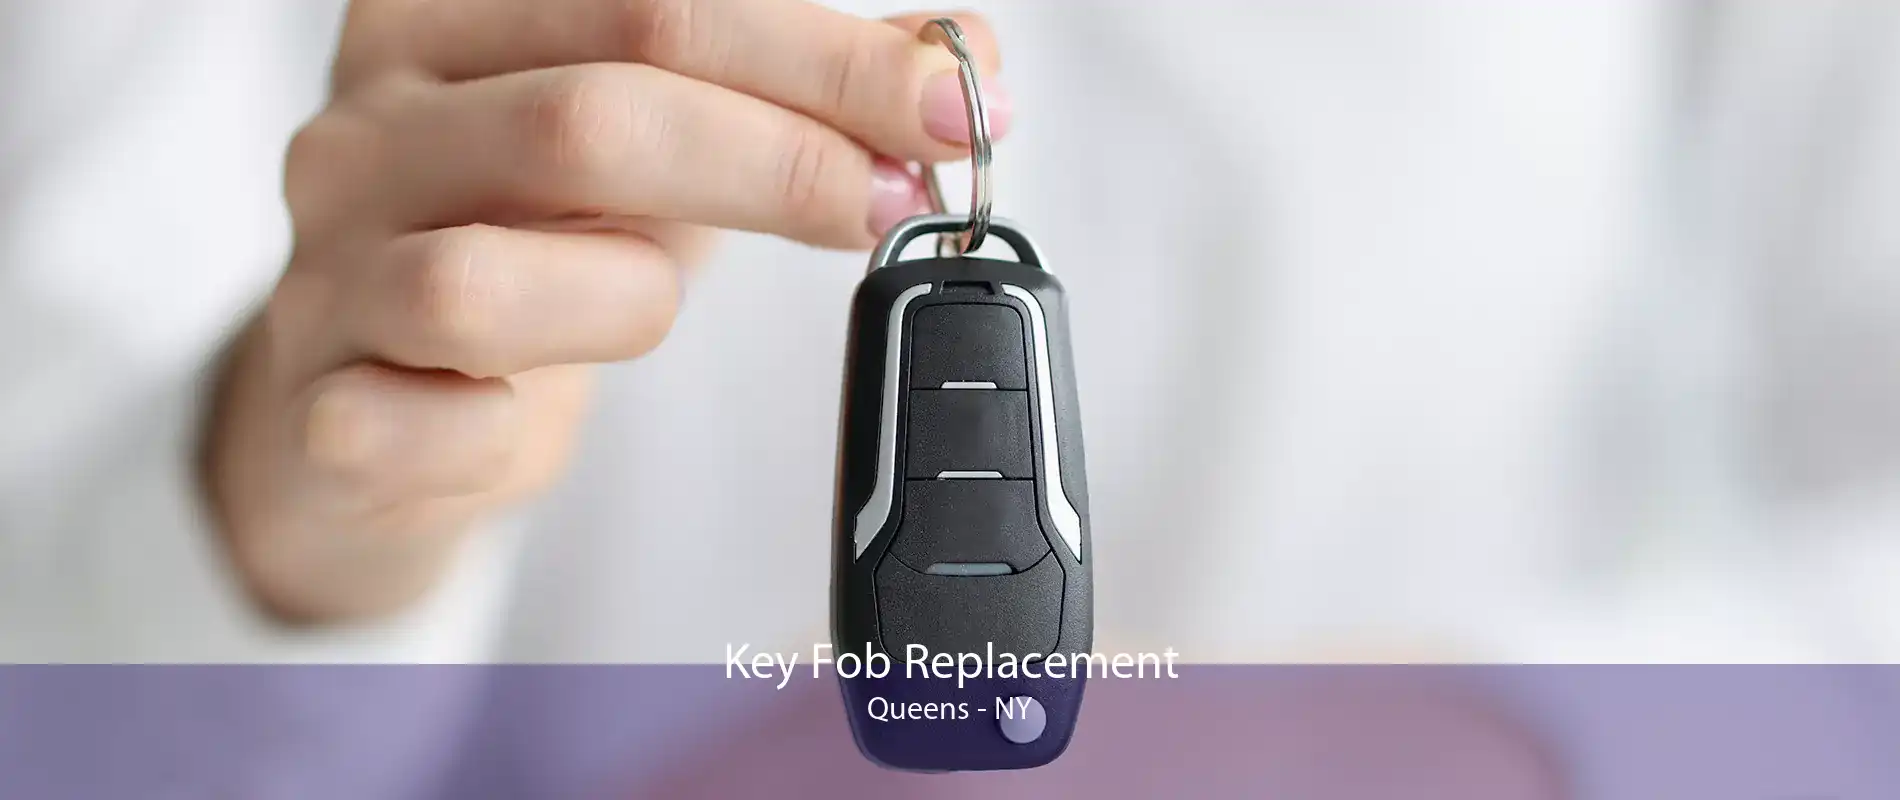 Key Fob Replacement Queens - NY